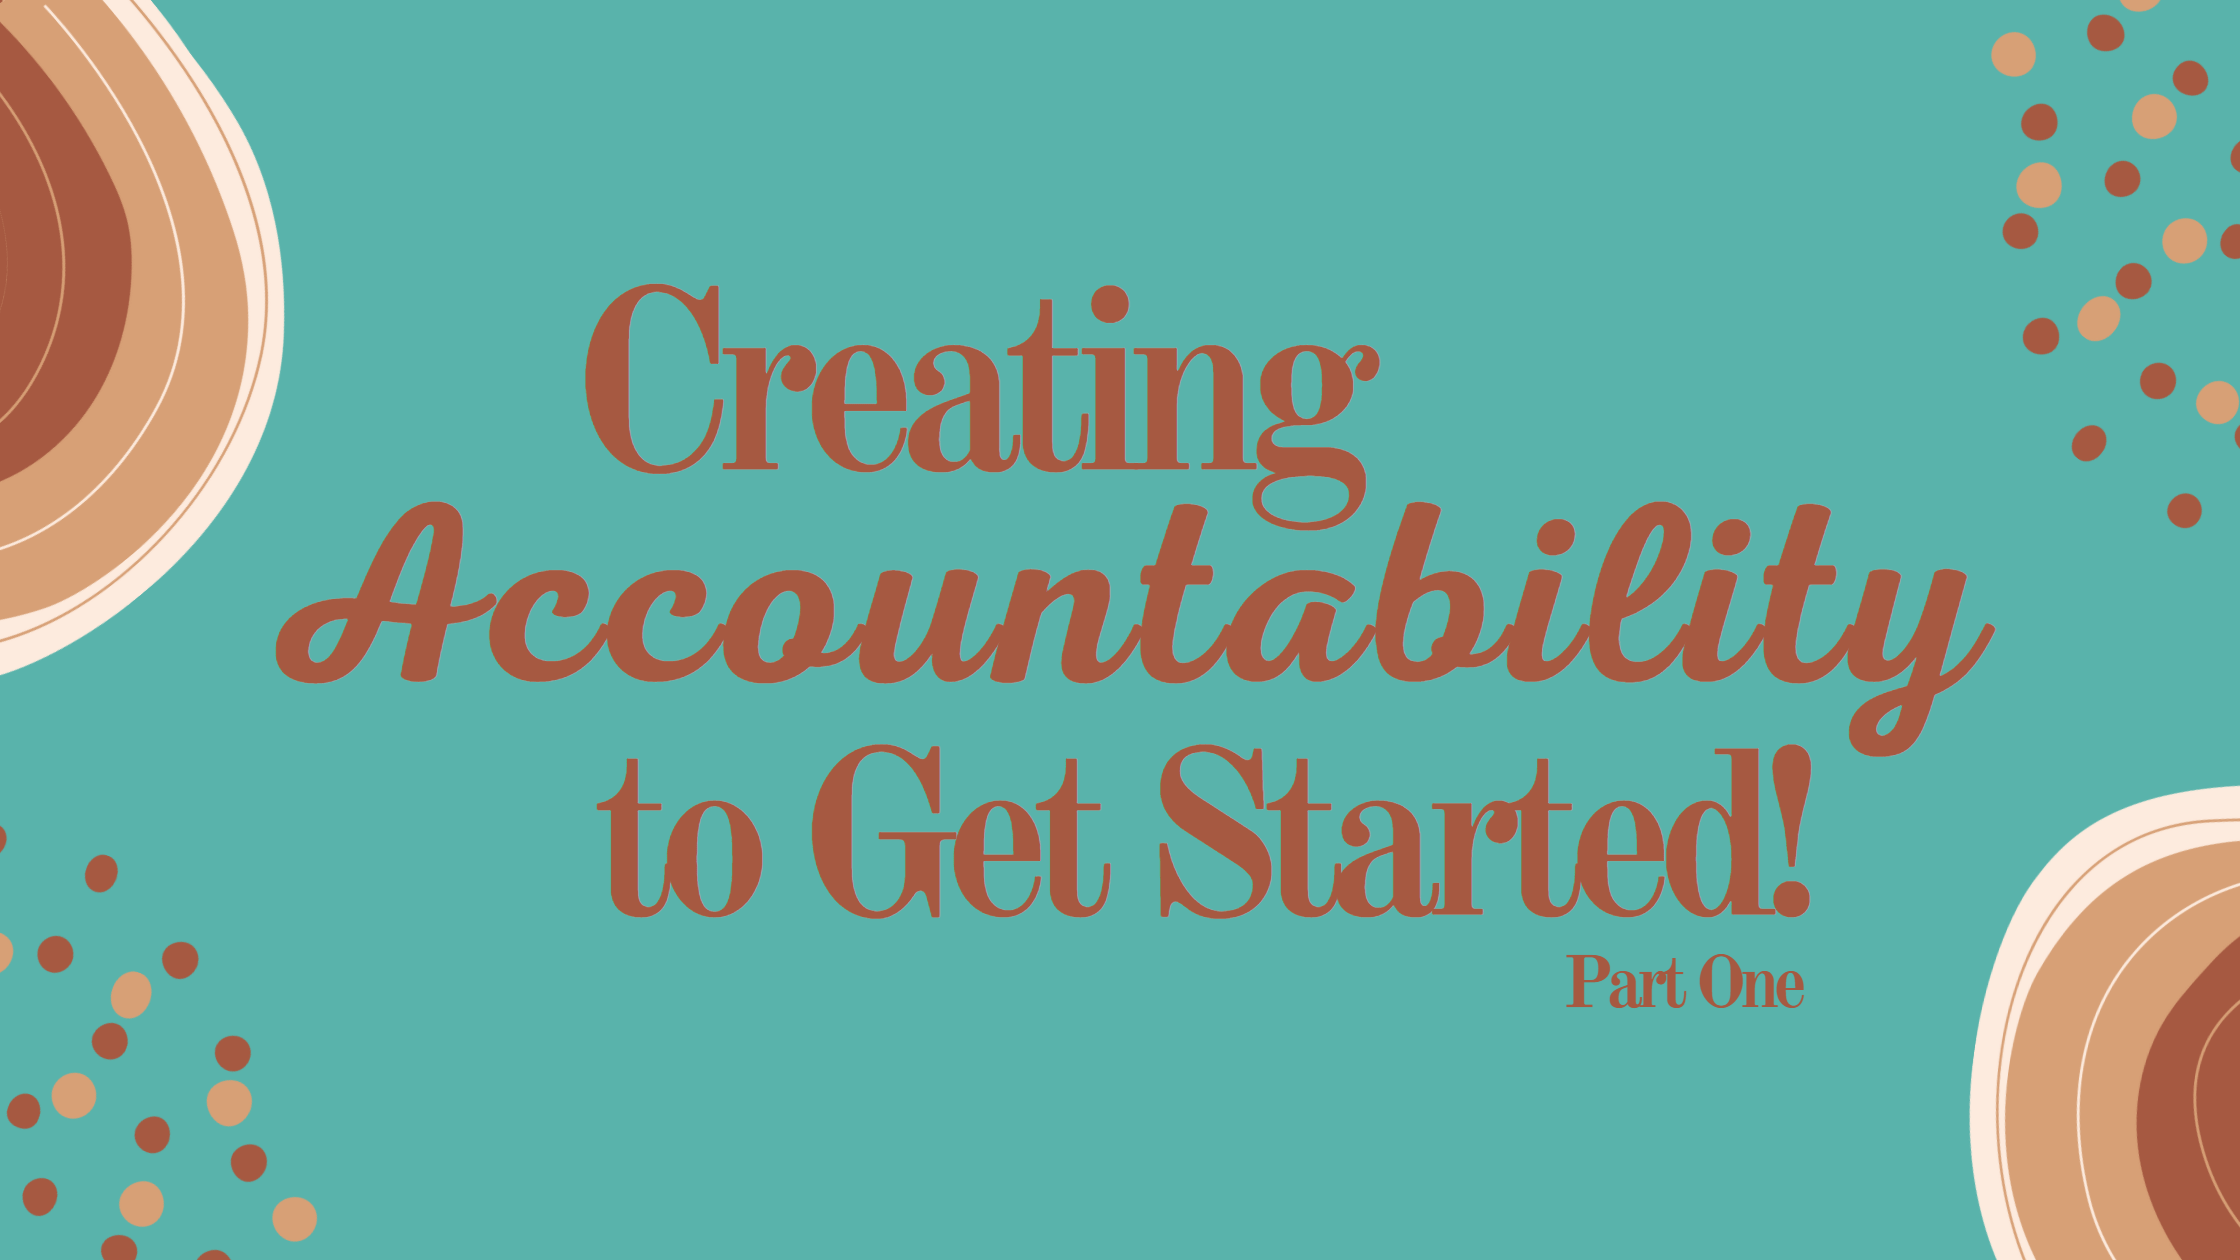 Creating Accountability to get started part 1